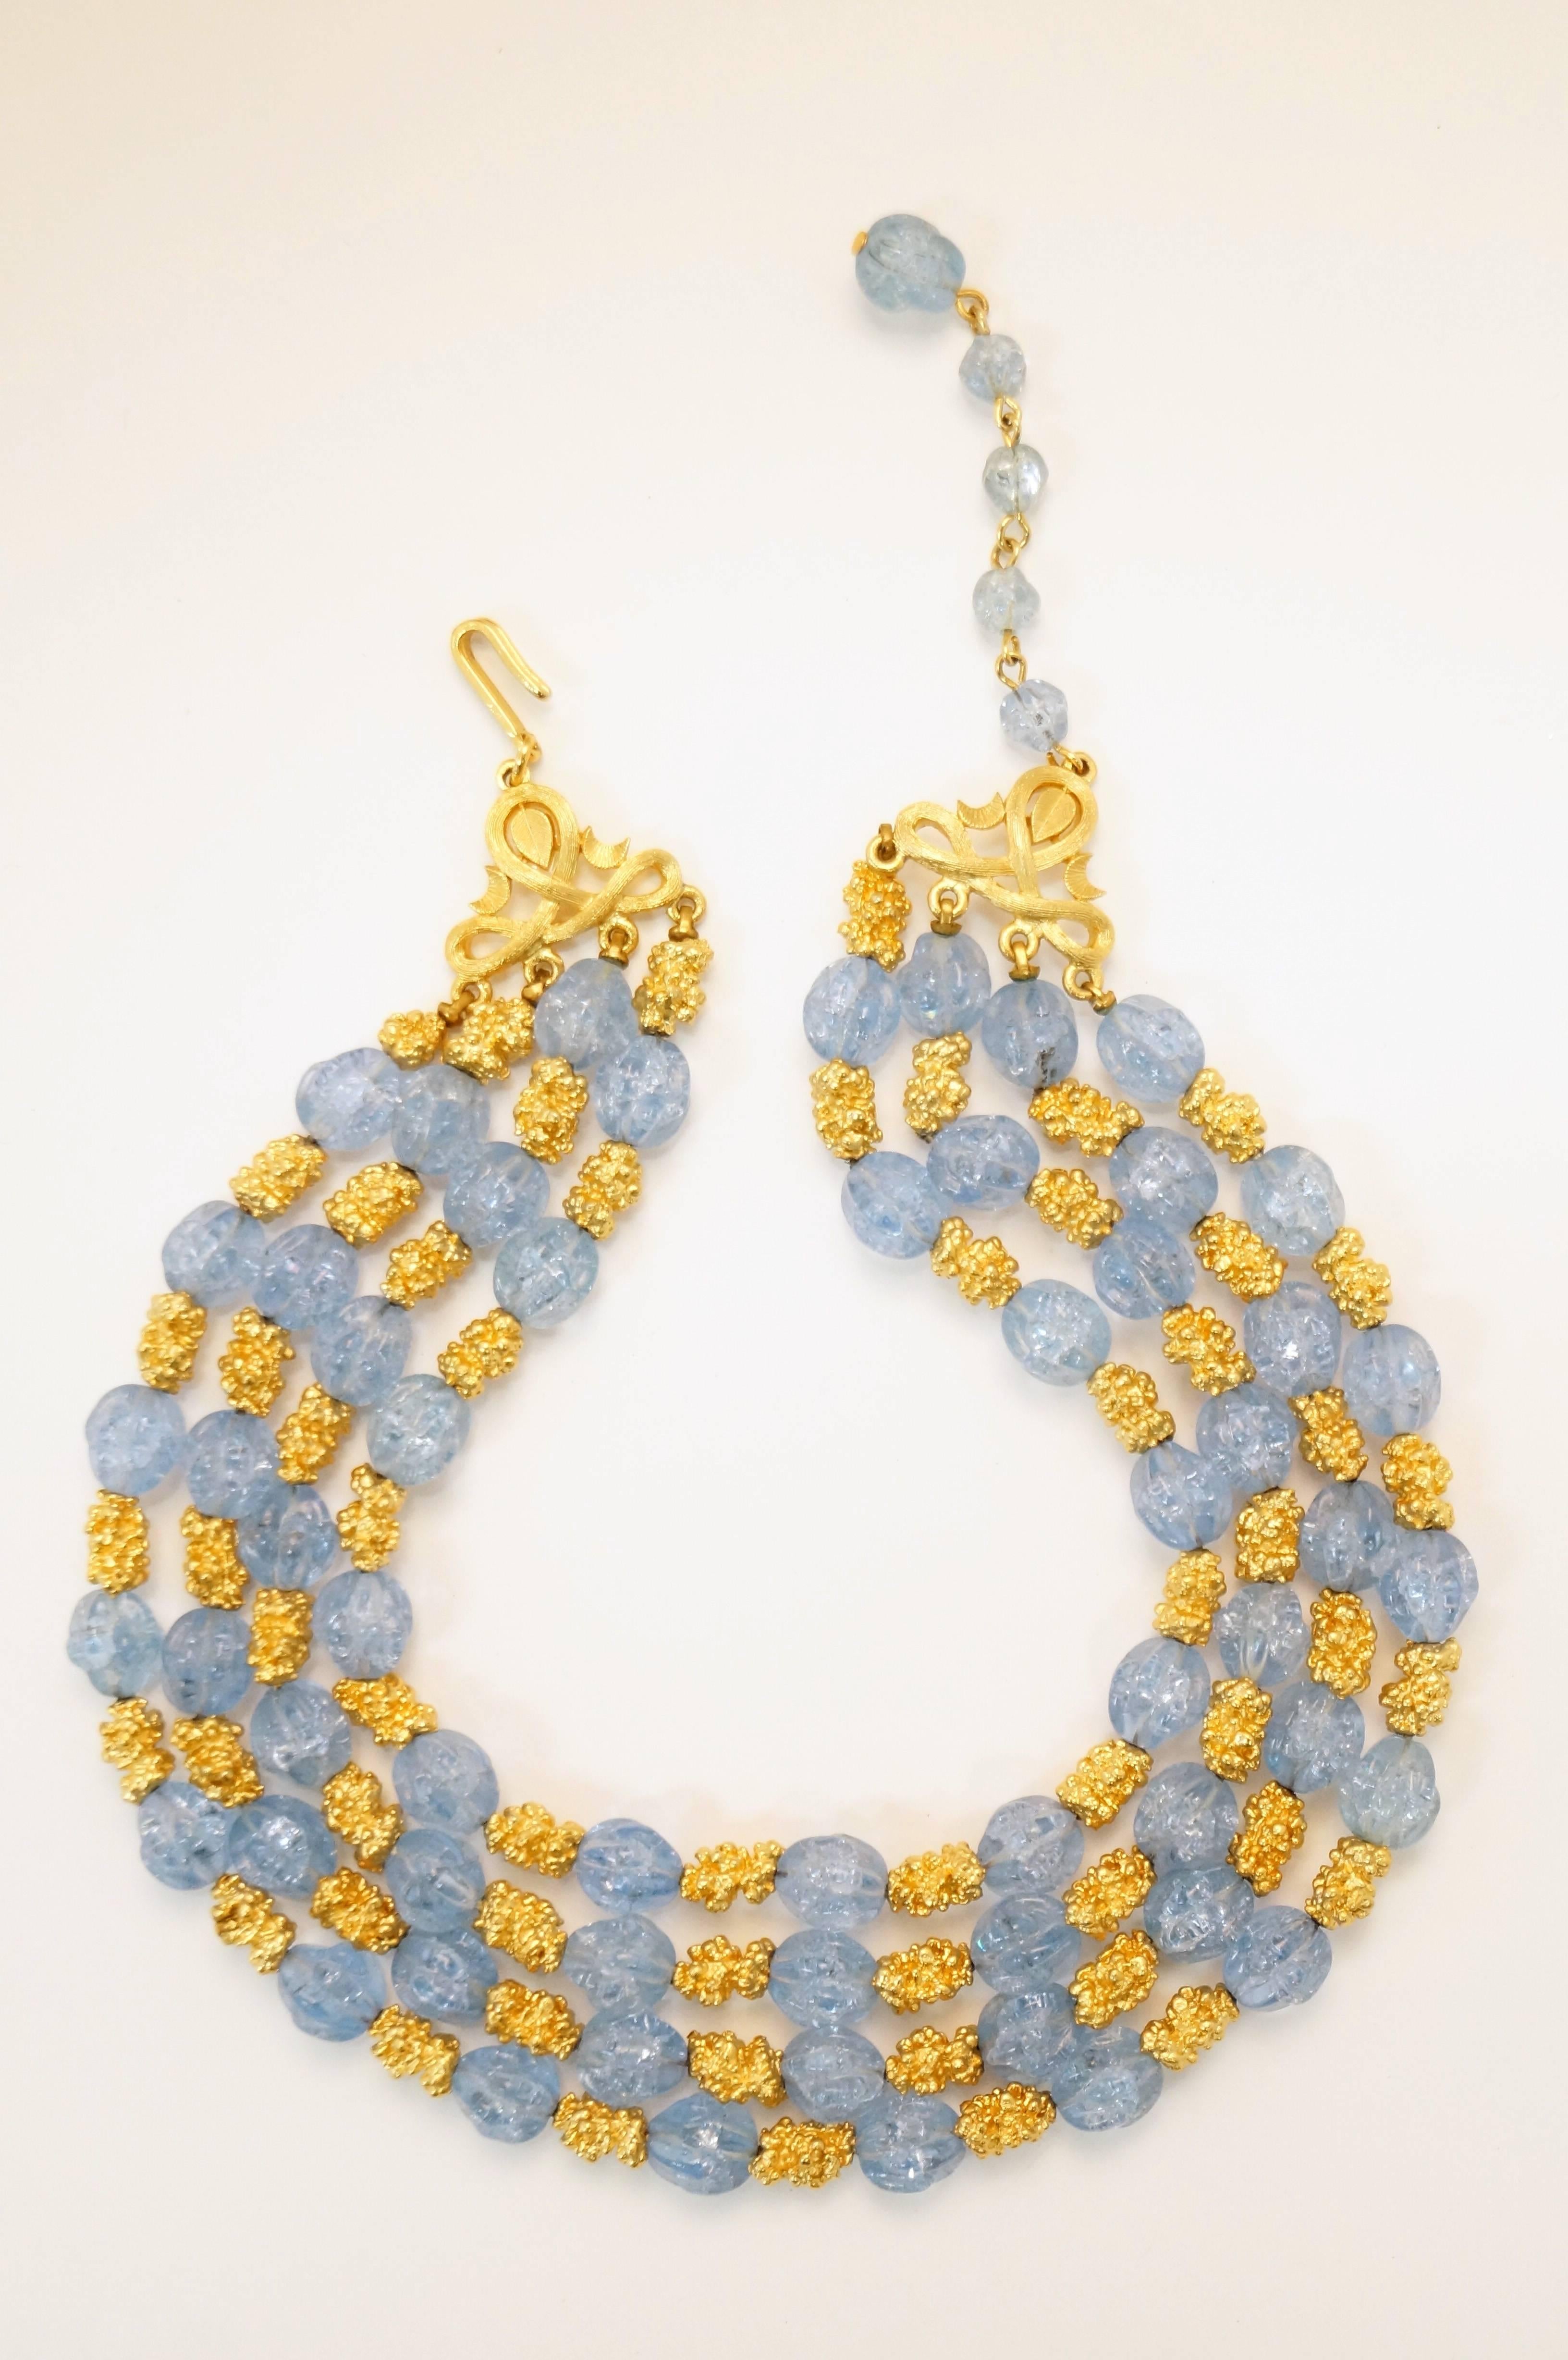 1950s Trifari Grand Parure - Blue Rhinestone with Gold Tone Nugget Spacers In Excellent Condition For Sale In Houston, TX